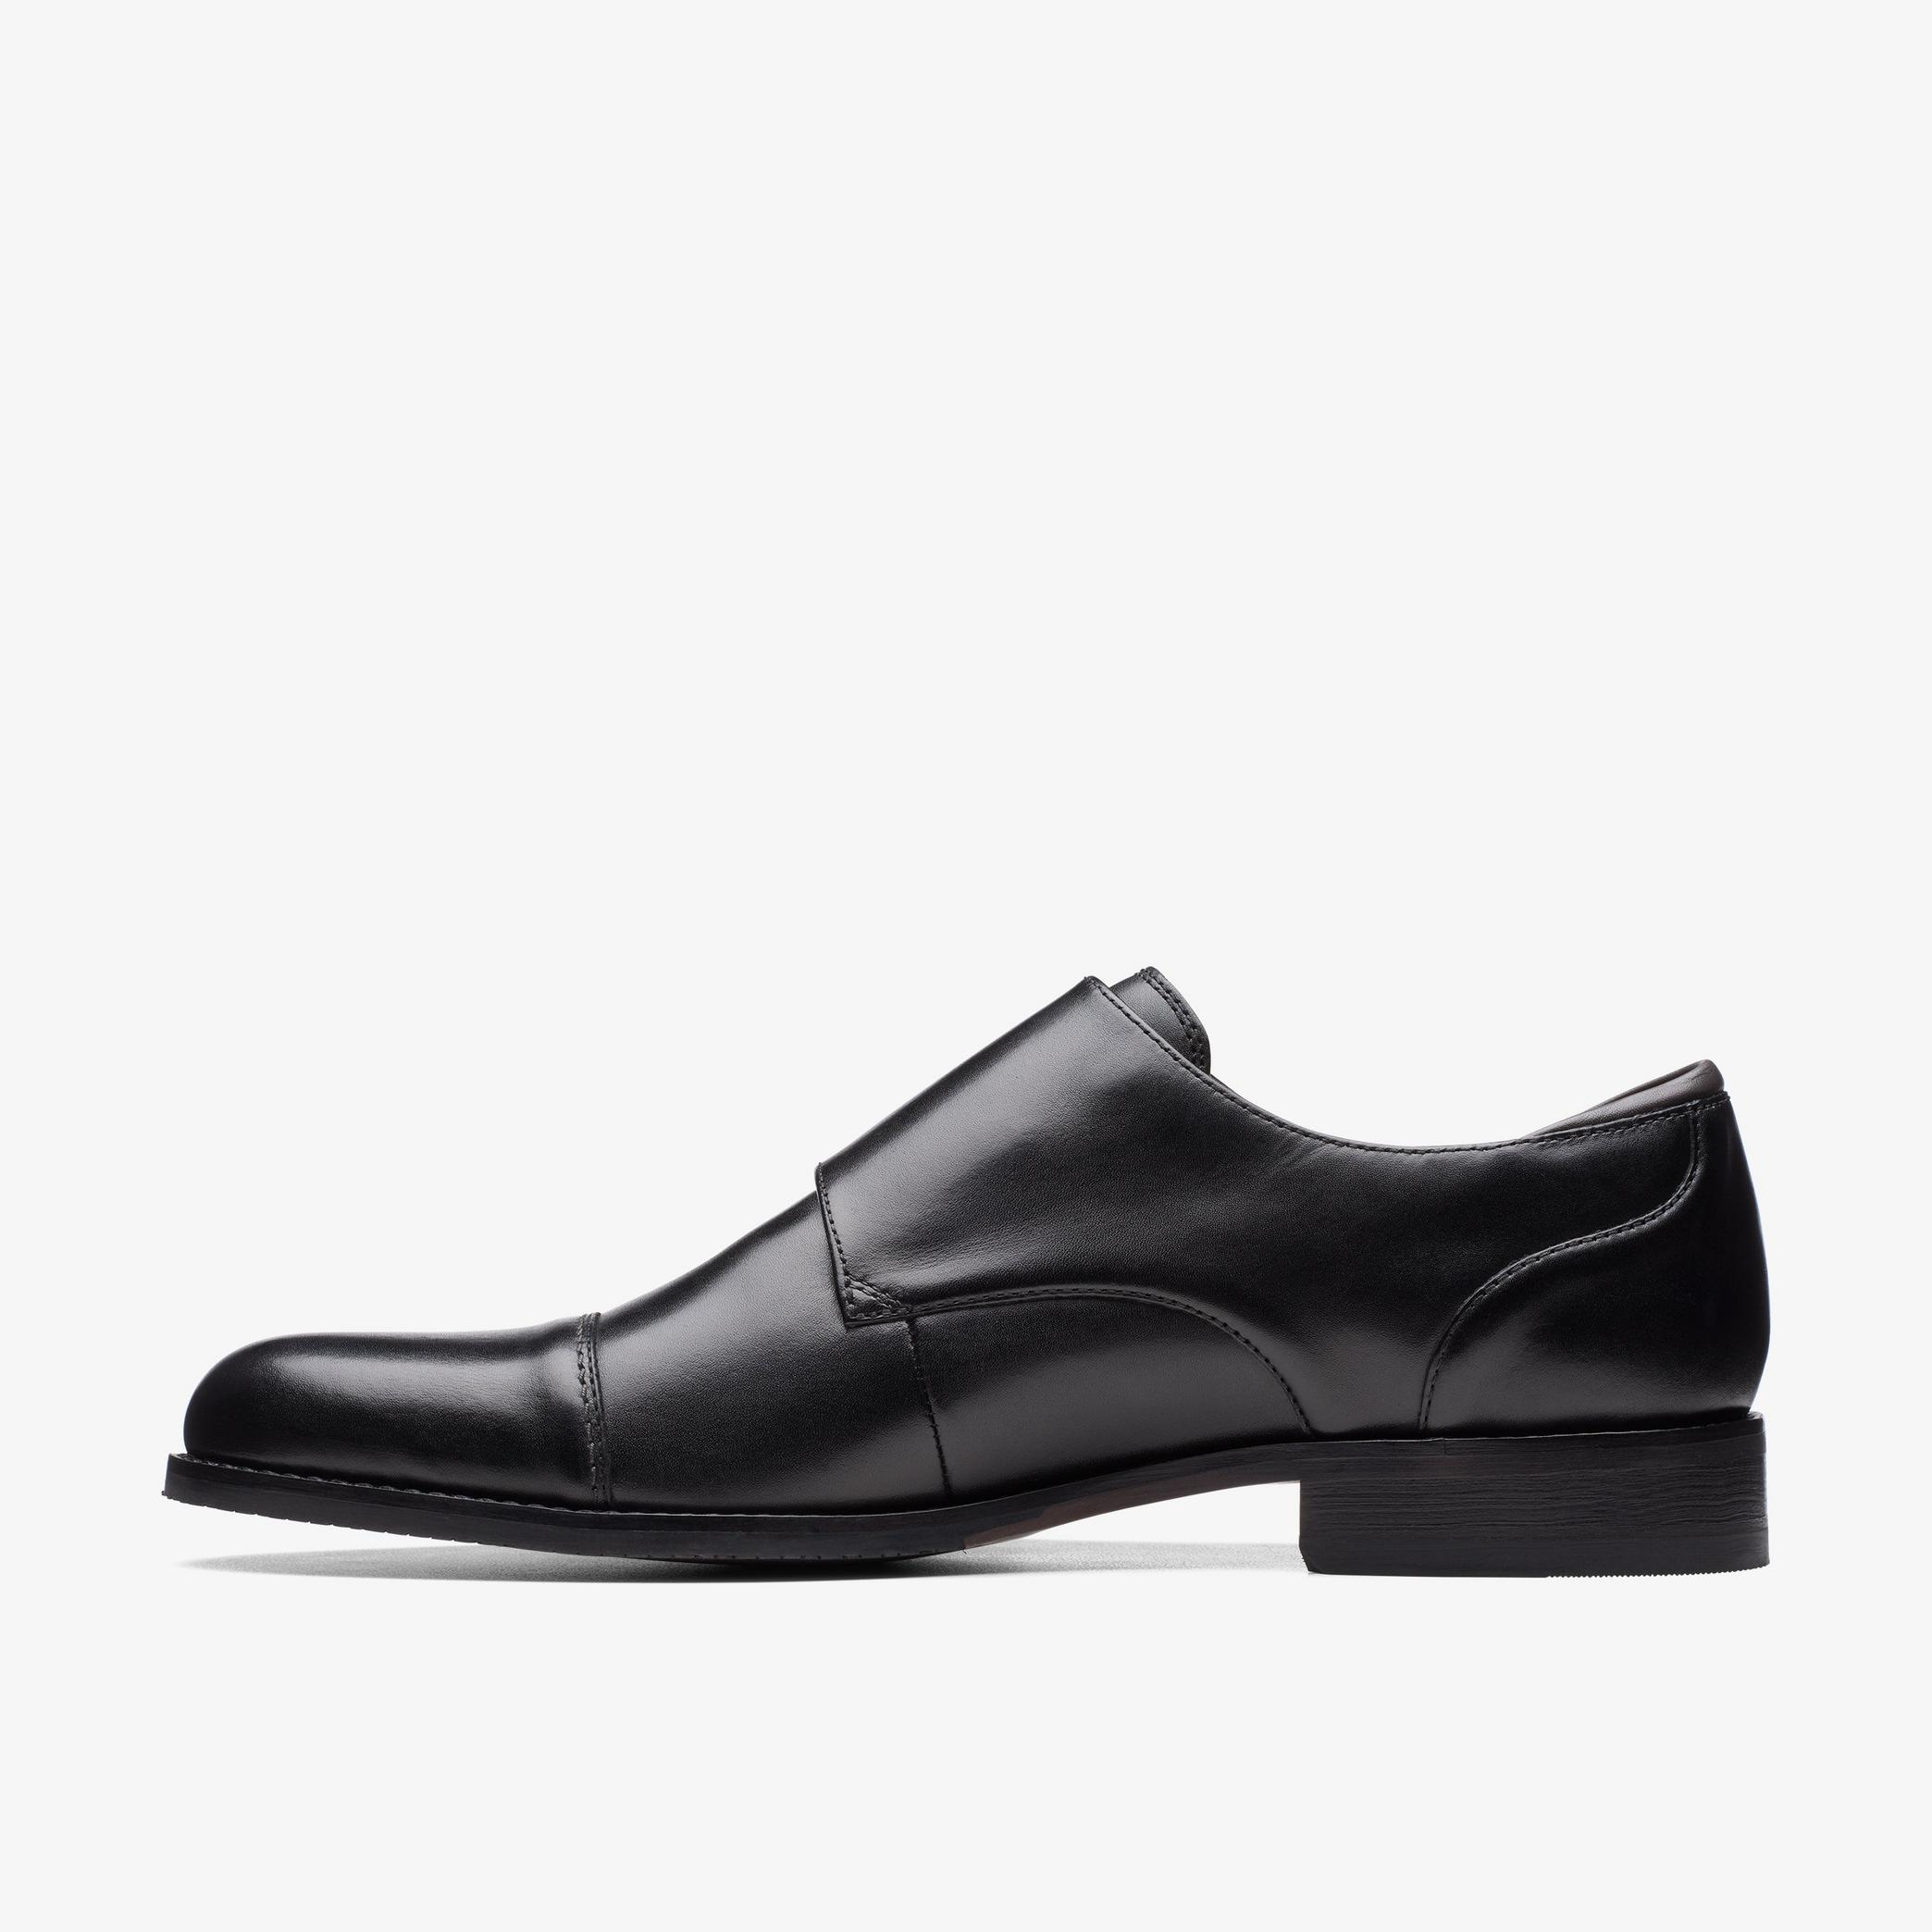 Craft Arlo Monk Black Leather Trouser Shoes, view 2 of 8